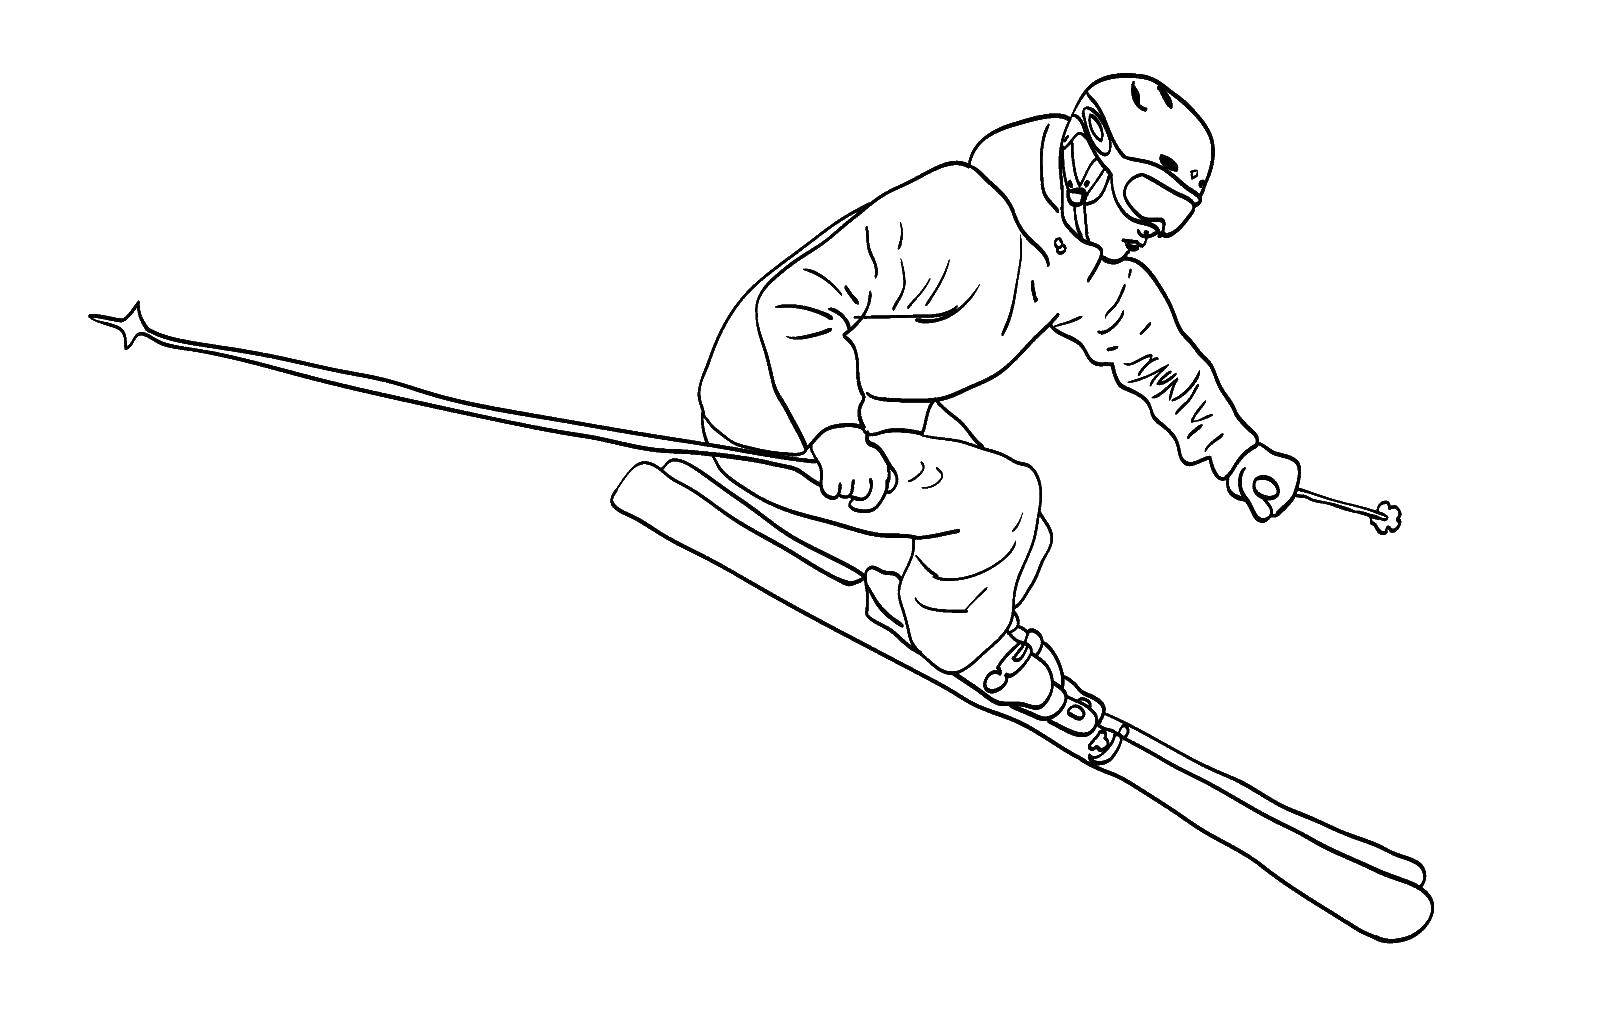 Coloring Skier. Category sports. Tags:  skiing.